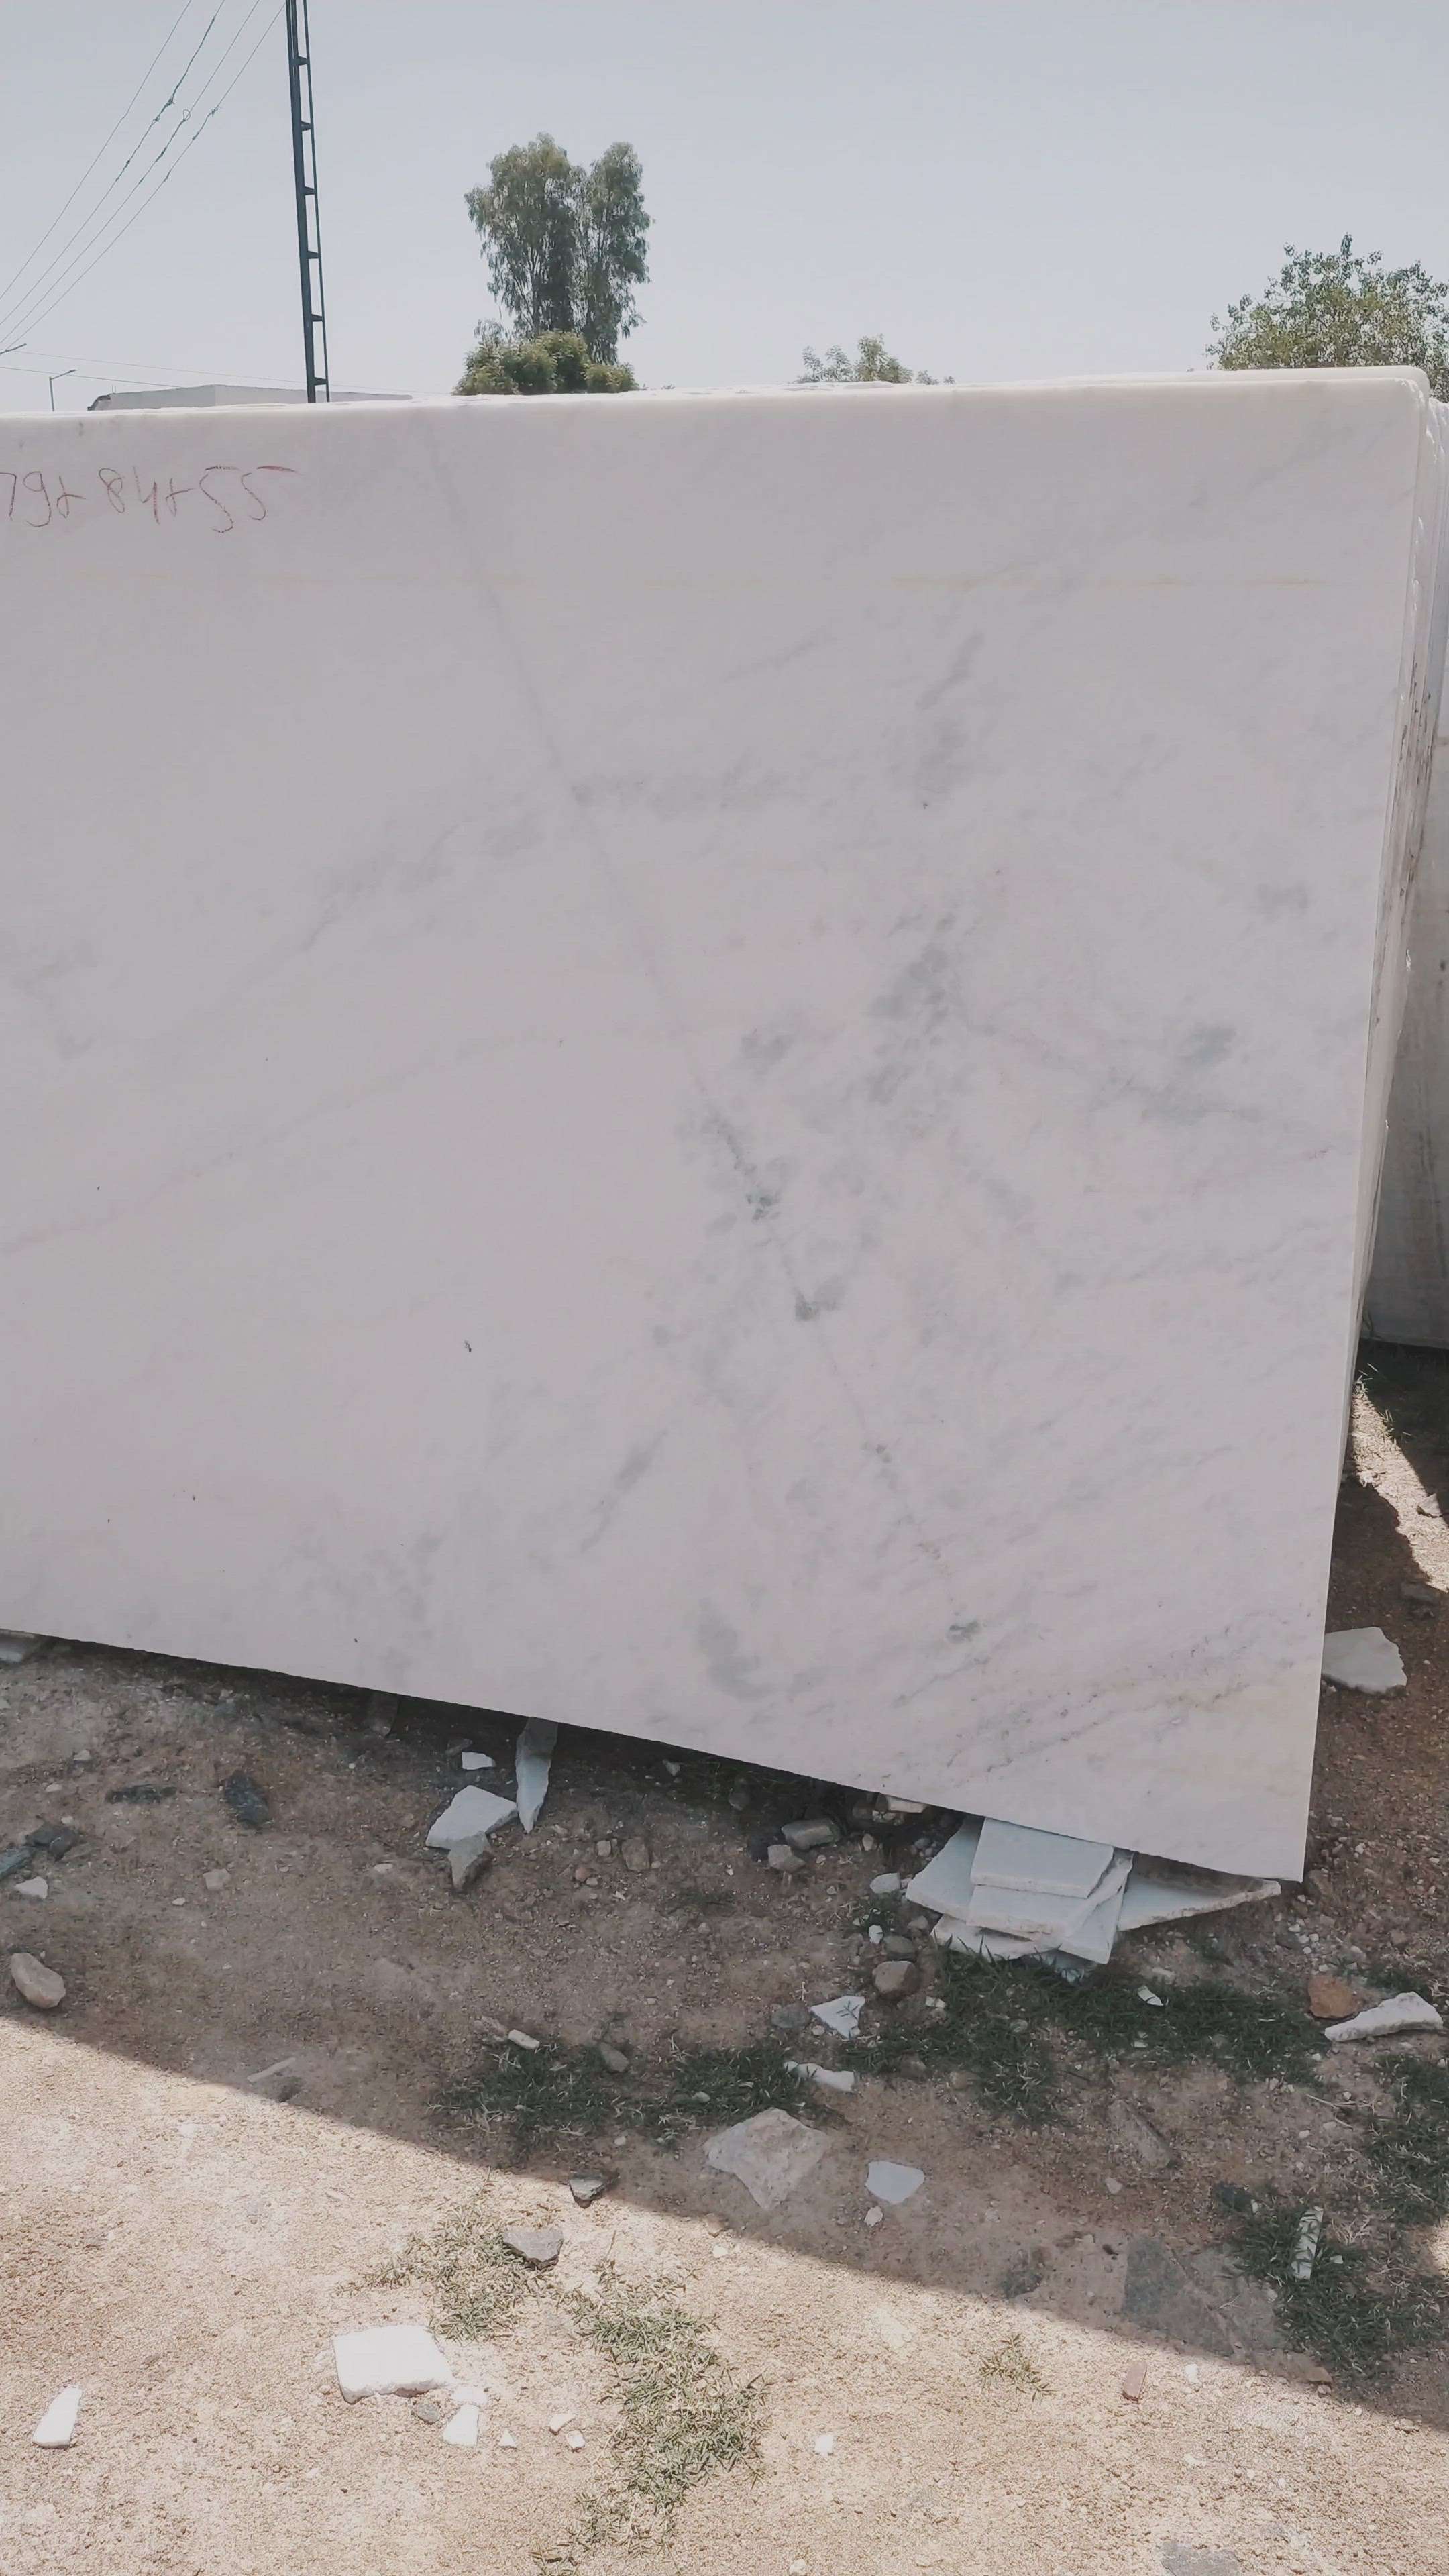 ✨️ Premium White THOLIGAN Marble ✨️

Size L6.5ft / H4.5ft - 16MM Thickness - Superior fresh & Similar lott

 #tholiganmarble  #whitemarble  #whitemarblemural  #whitemarbel  #MarbleFlooring  #marblecontractor